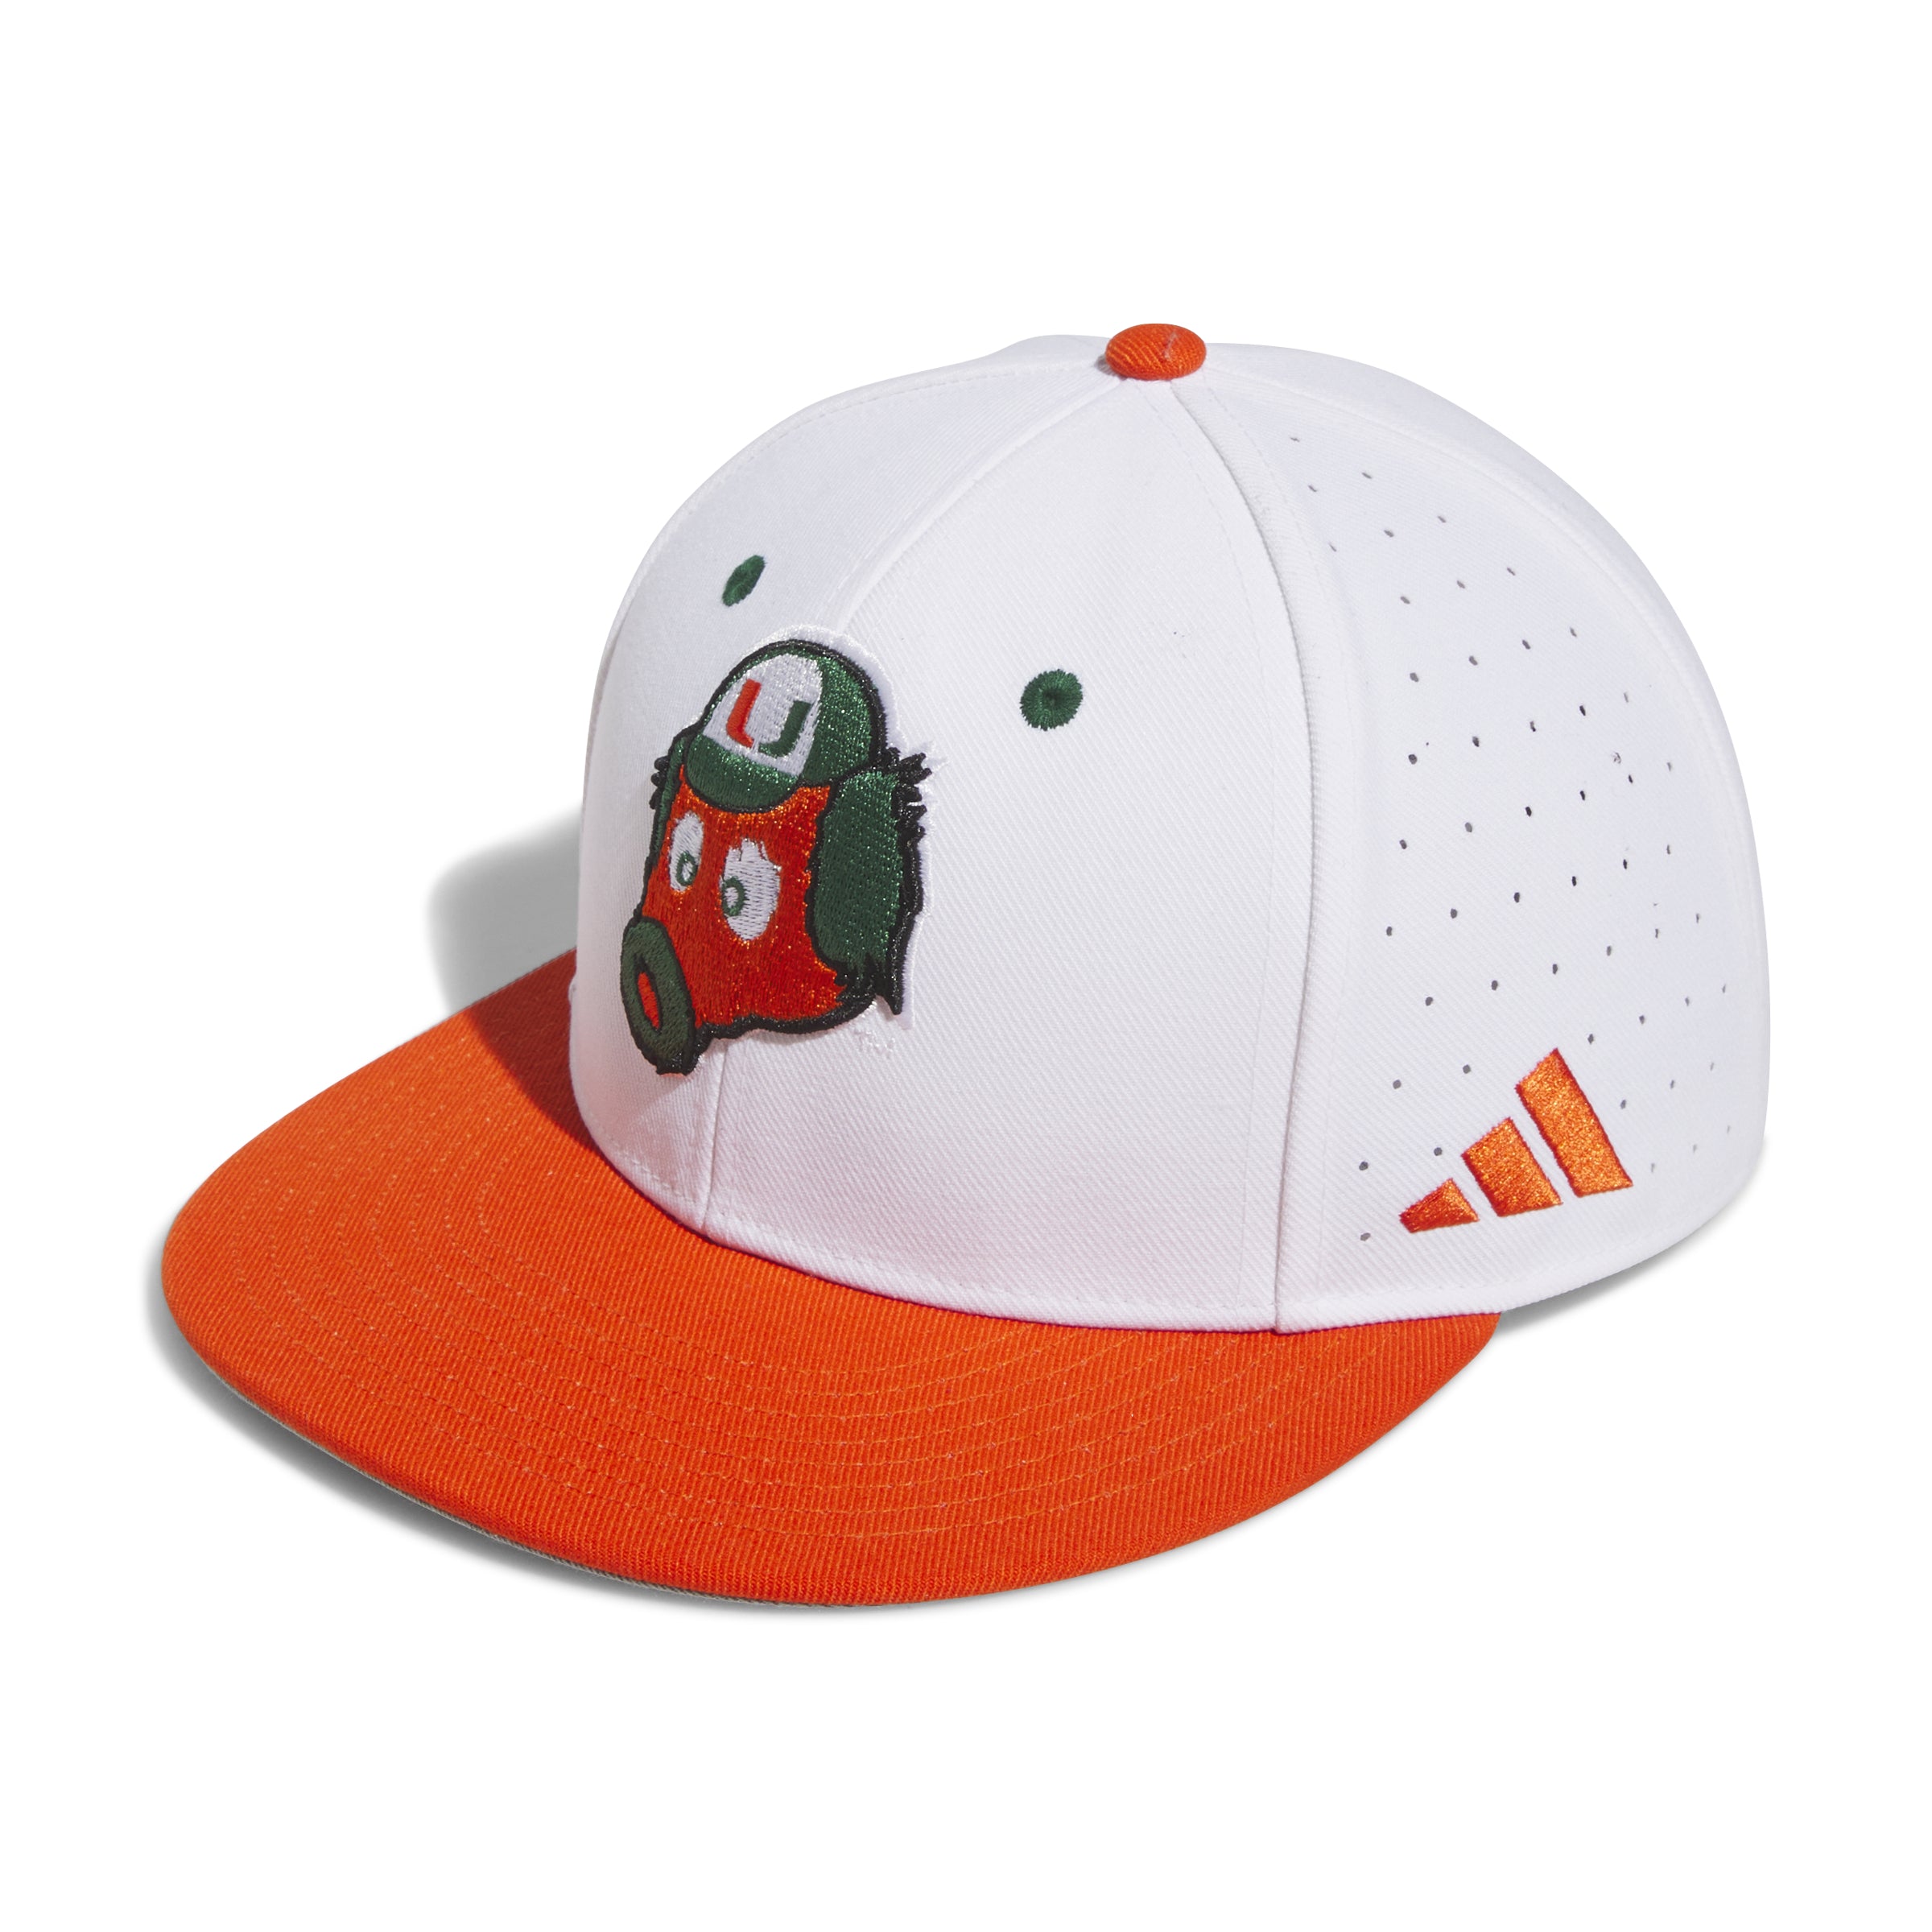 Miami Hurricanes adidas On Field Maniac Perforated Fitted Baseball Hat - White